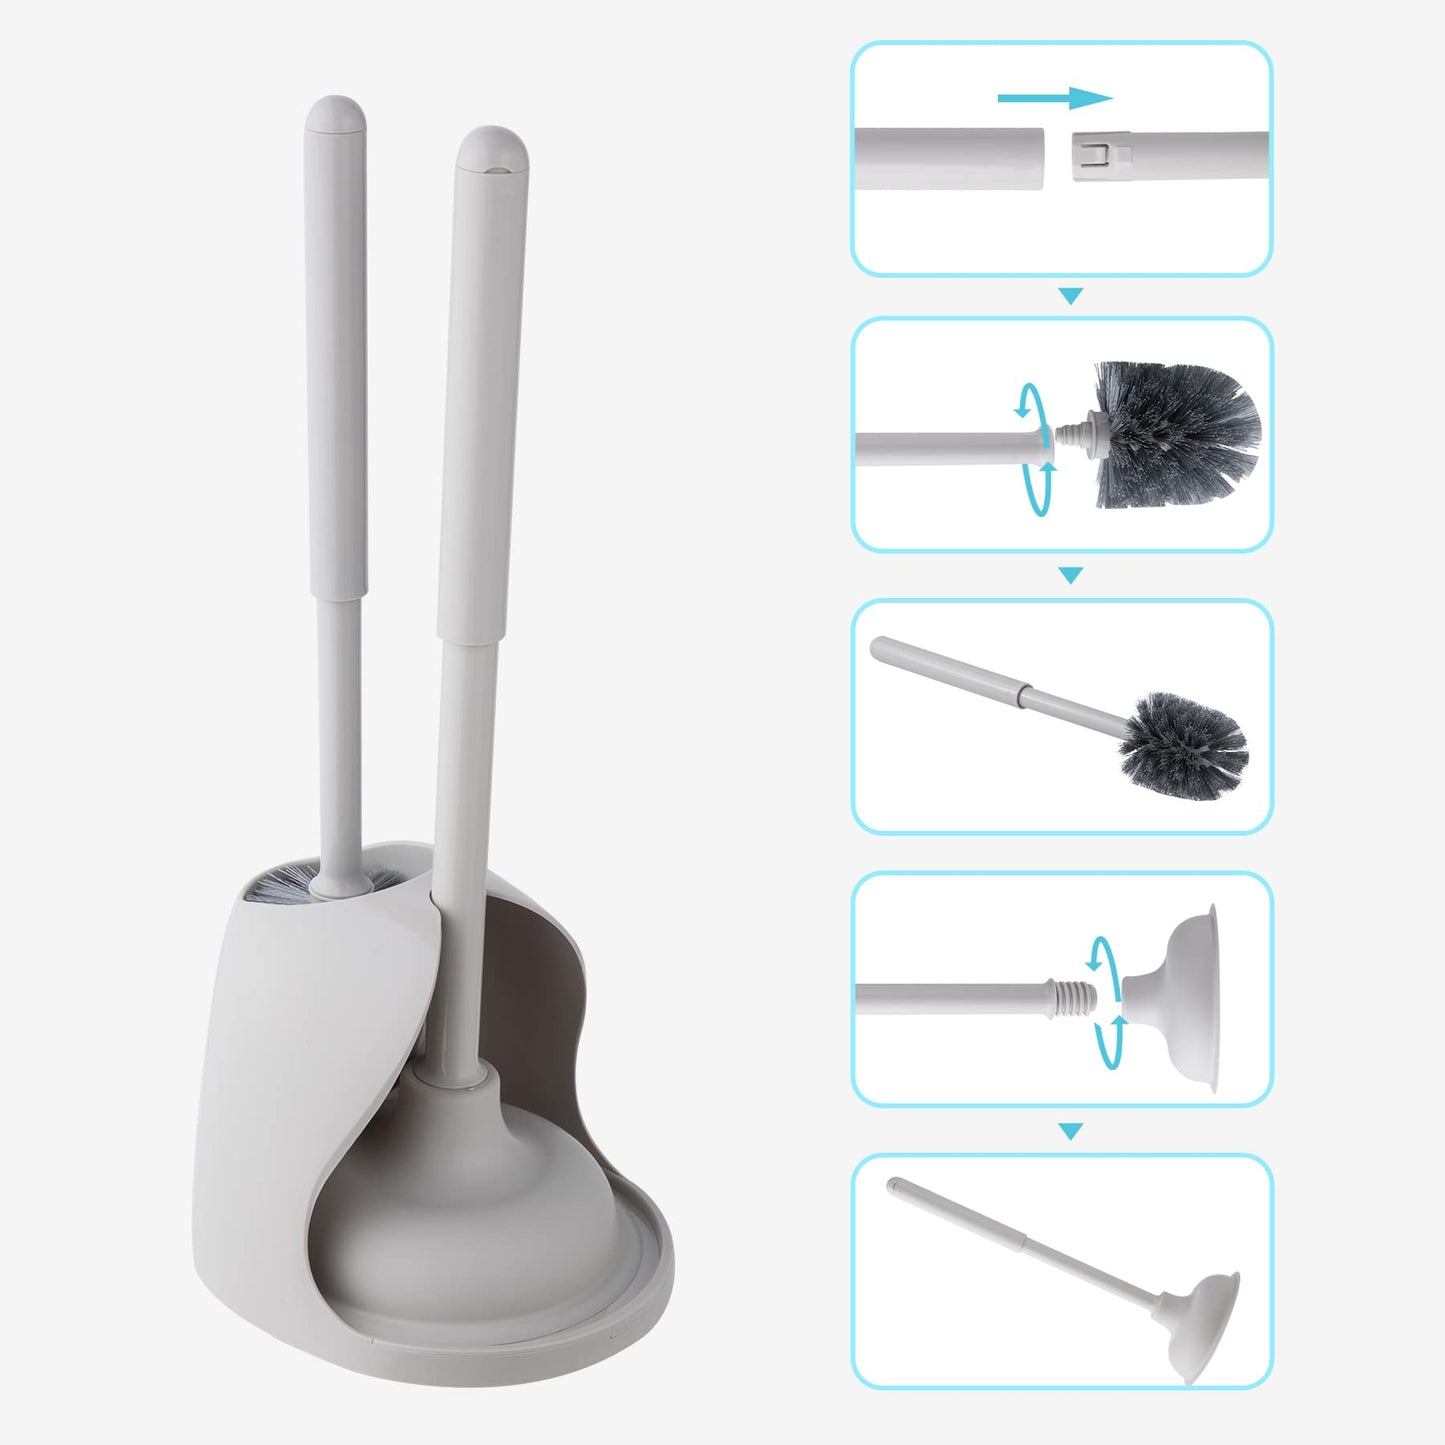 Yocada Toilet Plunger and Brush Set 2 in 1 Toilet Bowl Brush and Plunger Combo with Holder for Bathroom Cleaning Tool